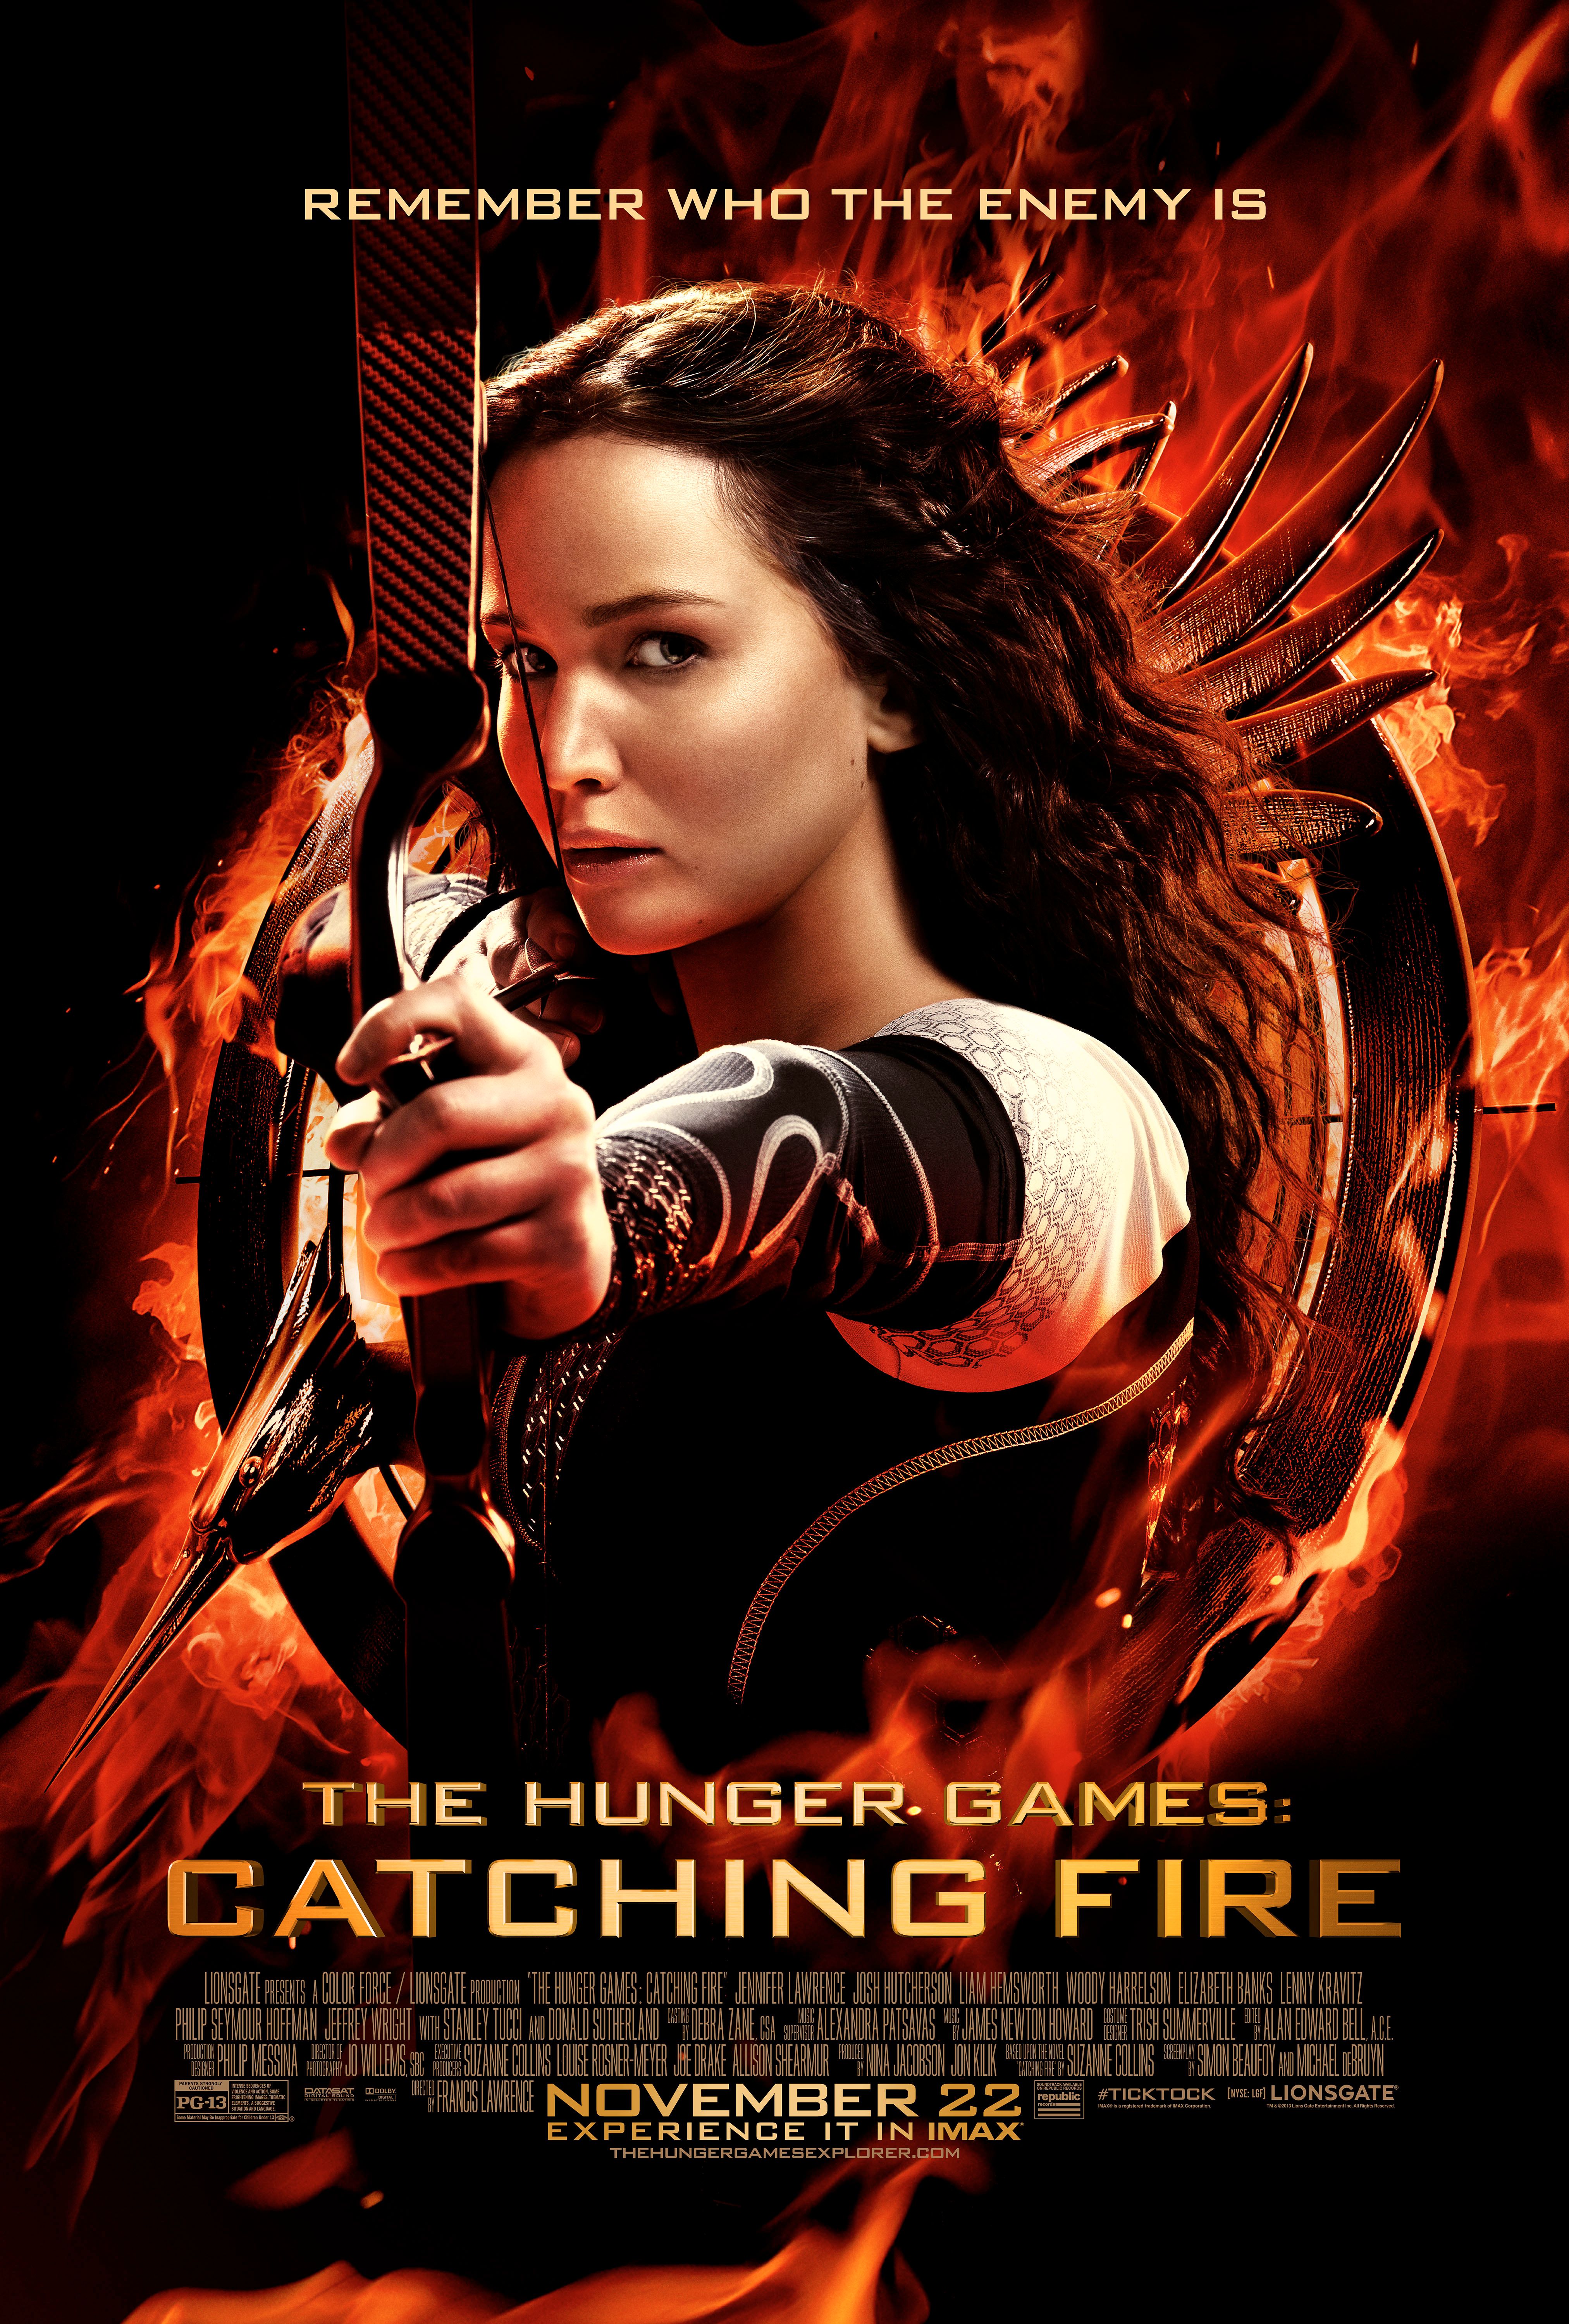 THE HUNGER GAMES: CATCHING FIRE Poster Starring Jennifer Lawrence